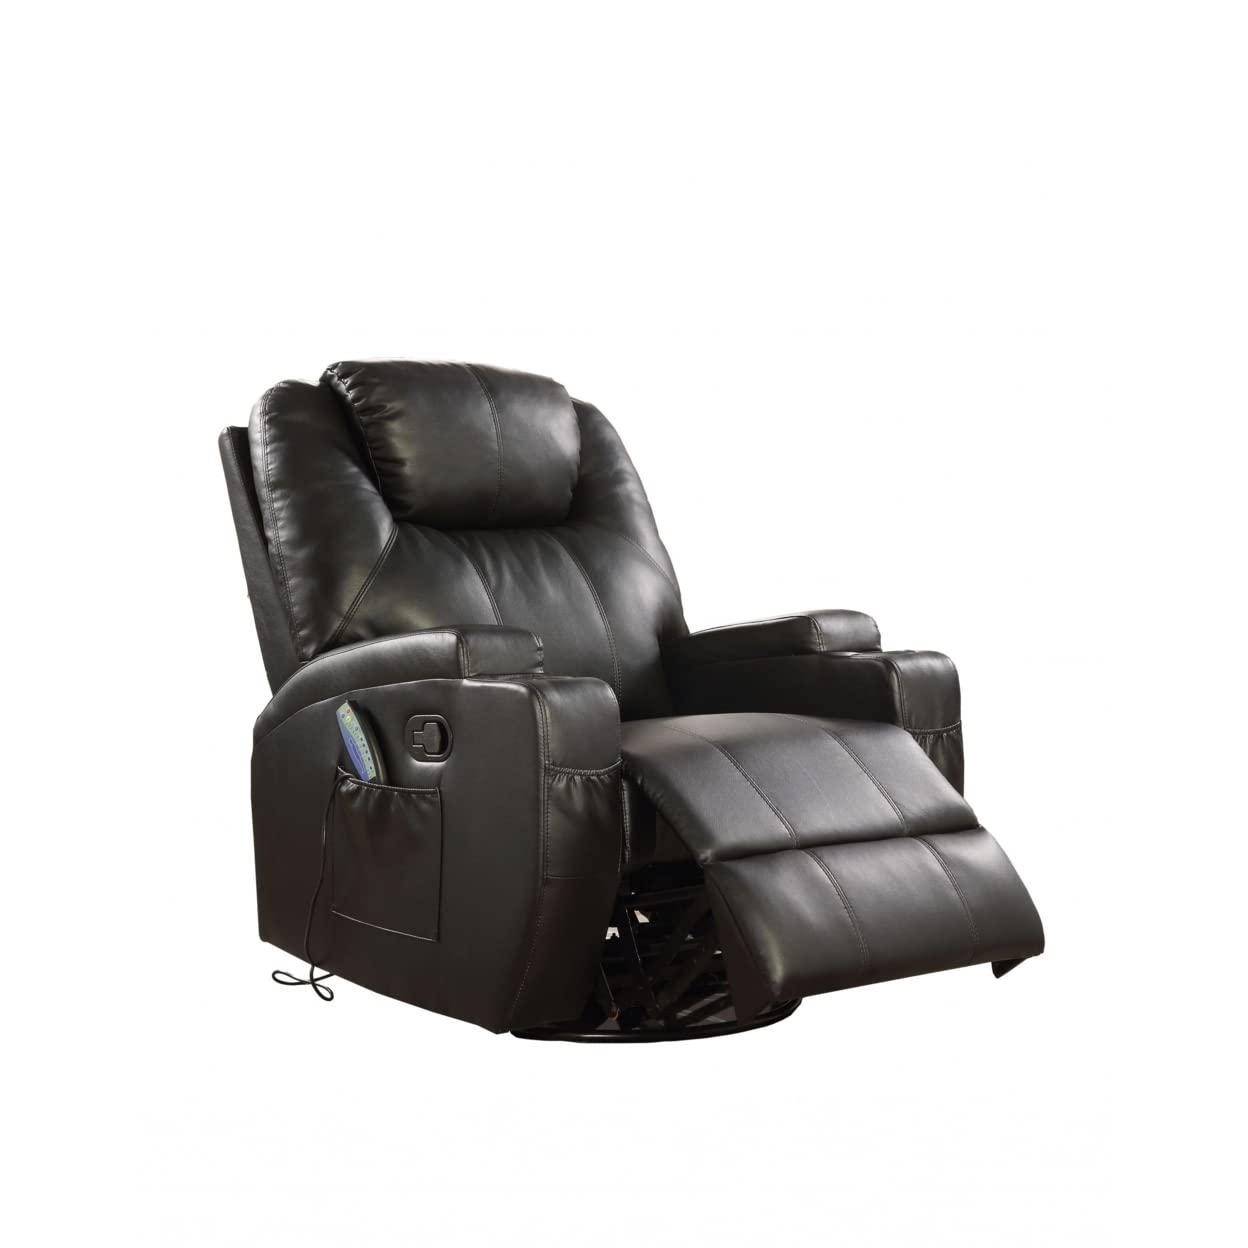 HomeRoots Boned Leather Match, Pine 34 X 37 X 41 Black Bonded Leather Match Swivel Rocker Recliner with Massage